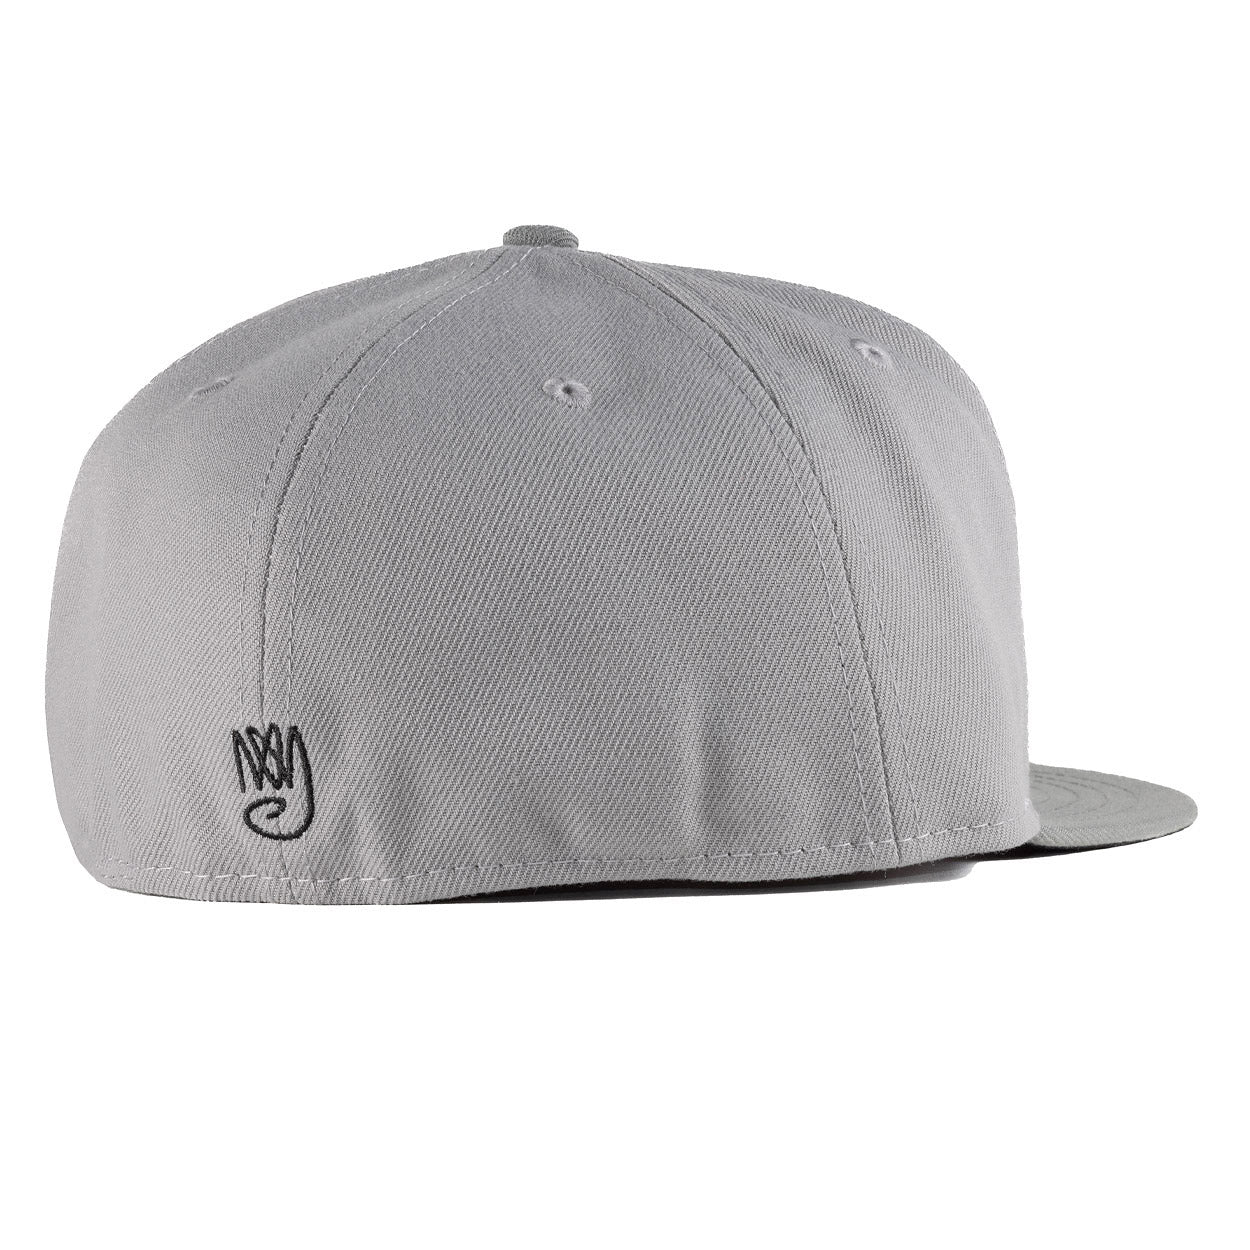 Angelino Grayscale New Era Fitted